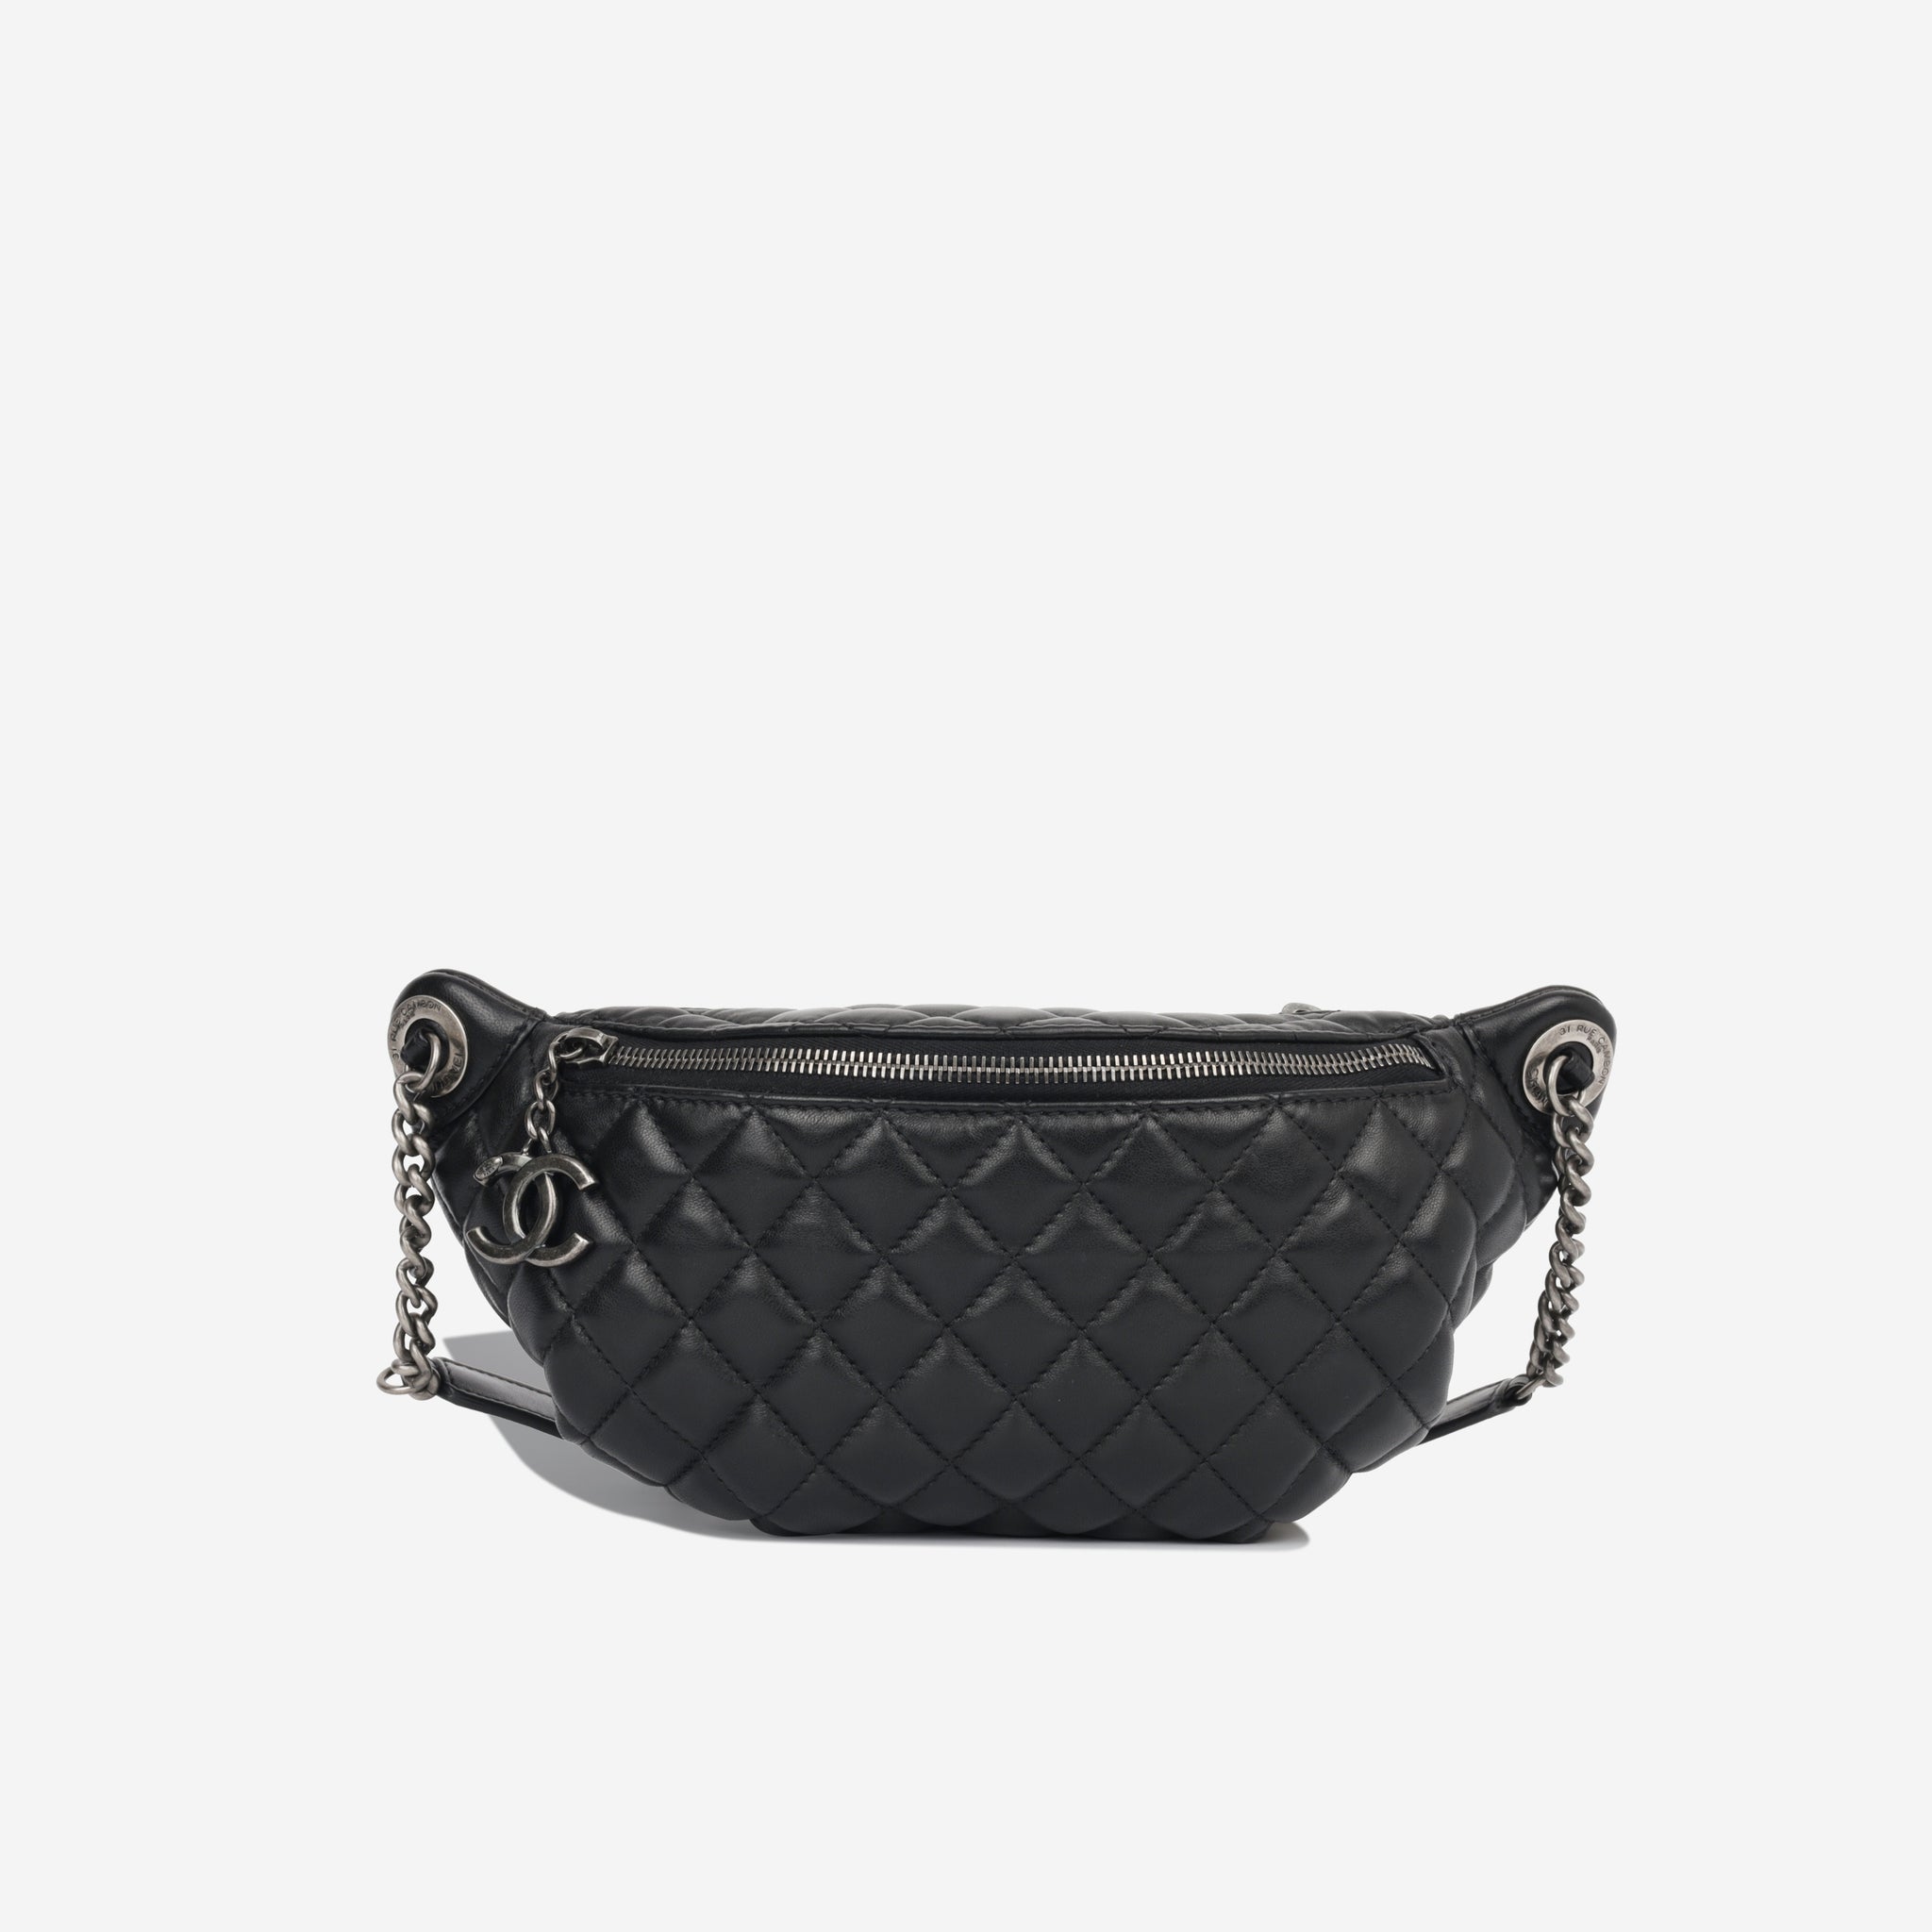 CHANEL Lambskin Quilted Banane Waist Bag Fanny Pack Black